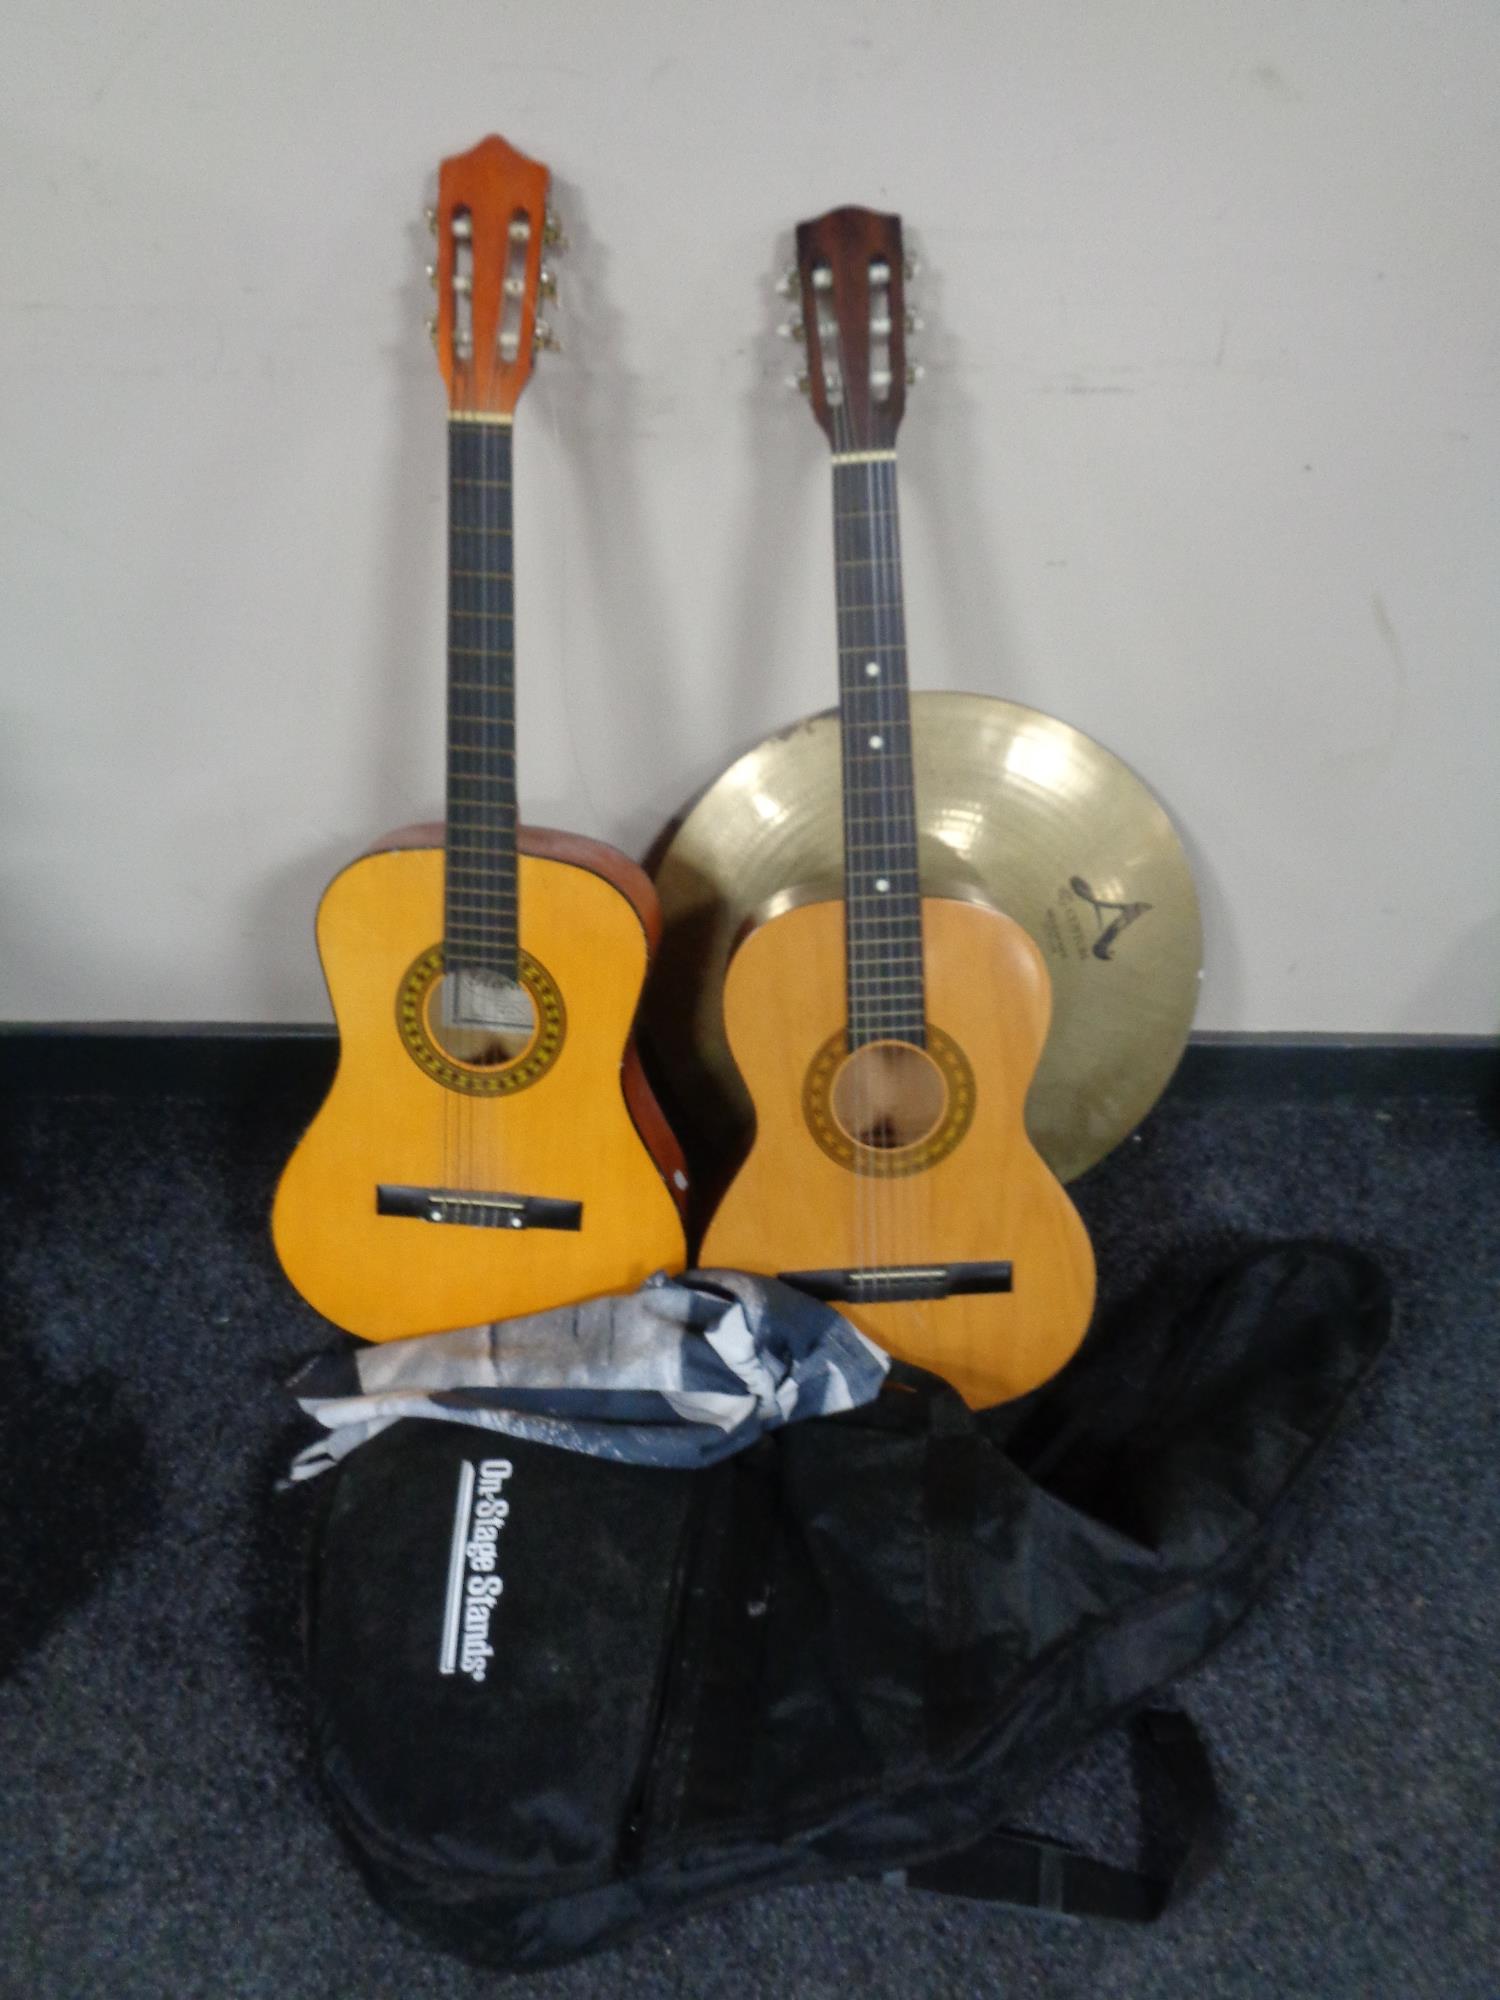 Two acoustic guitars, one in carry bag, together with a cymbal.